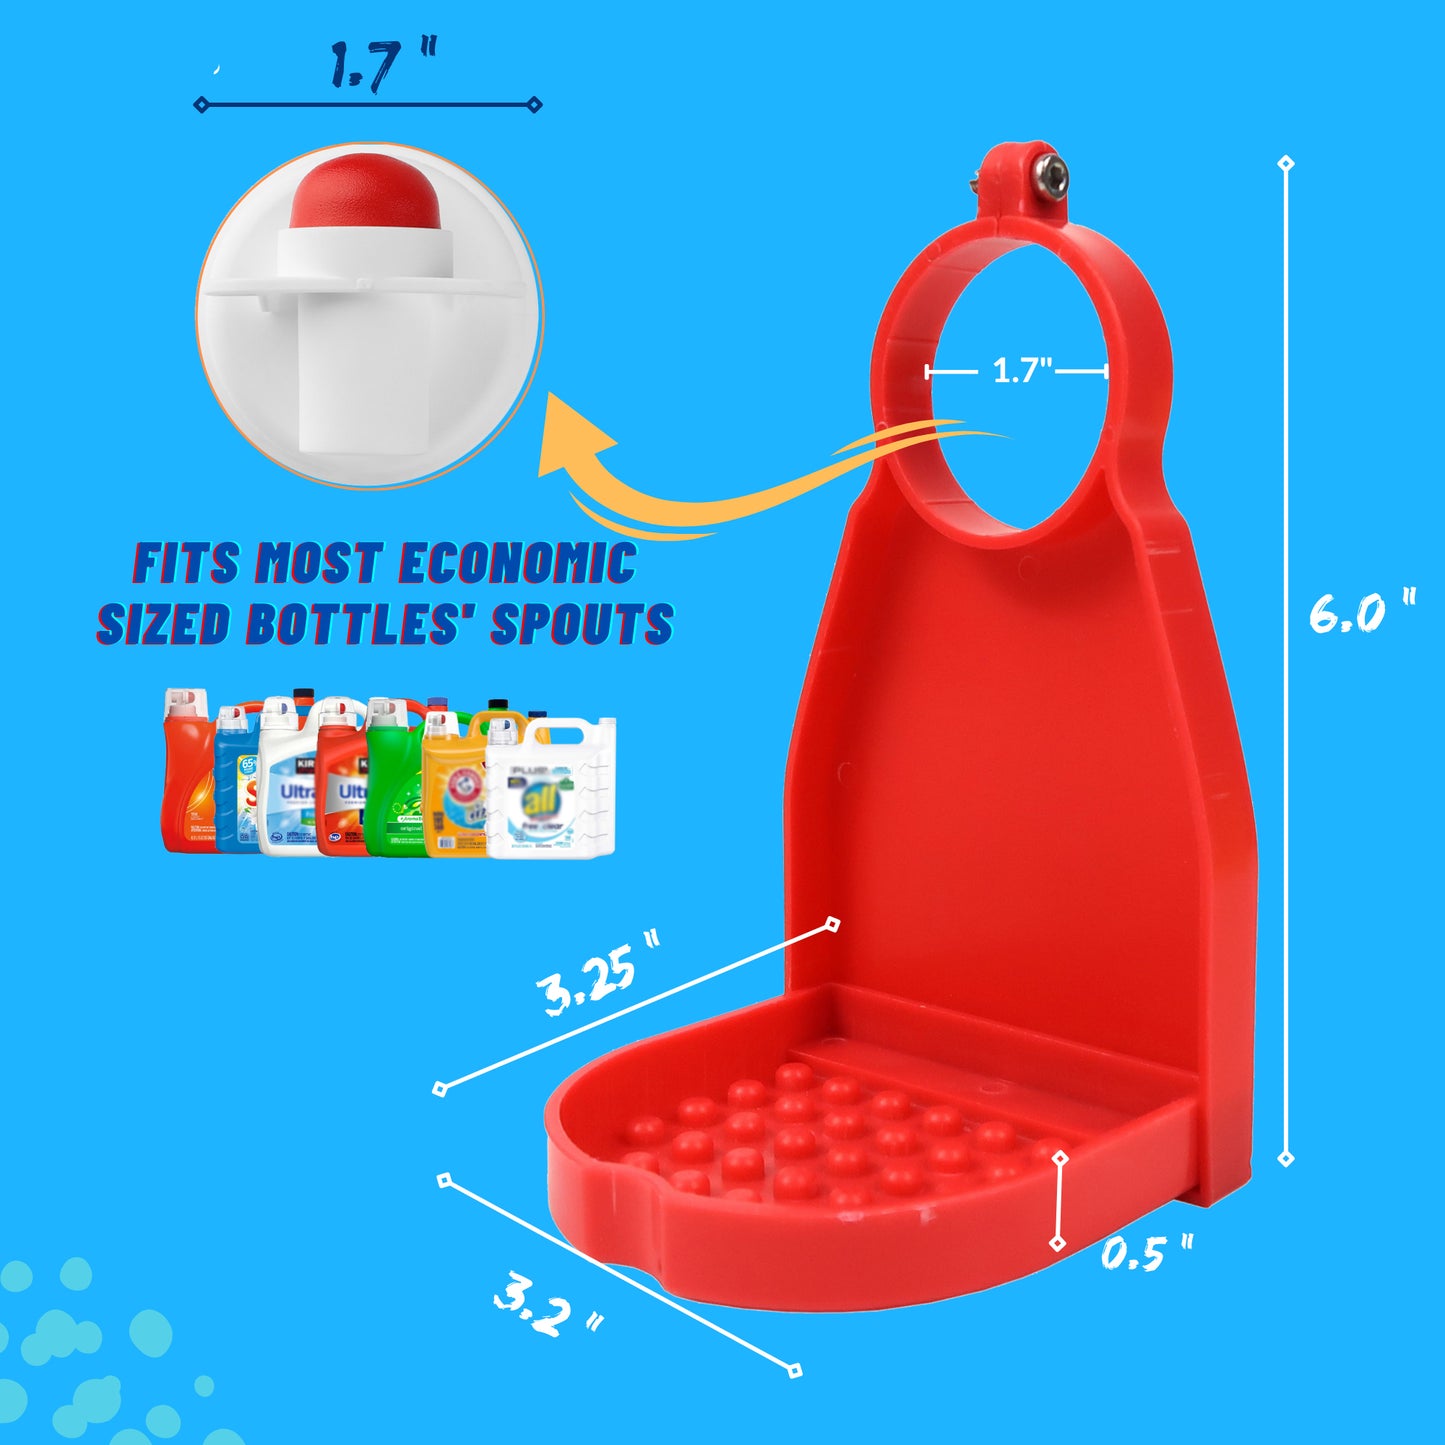 Laundry Drip Catcher - Laundry Detergent Cup Holder & Drip Tray Catcher for laundry room organizers and storage to Keep Room Tidy Laundry Station with Hex Wrench【1 Pack Red】